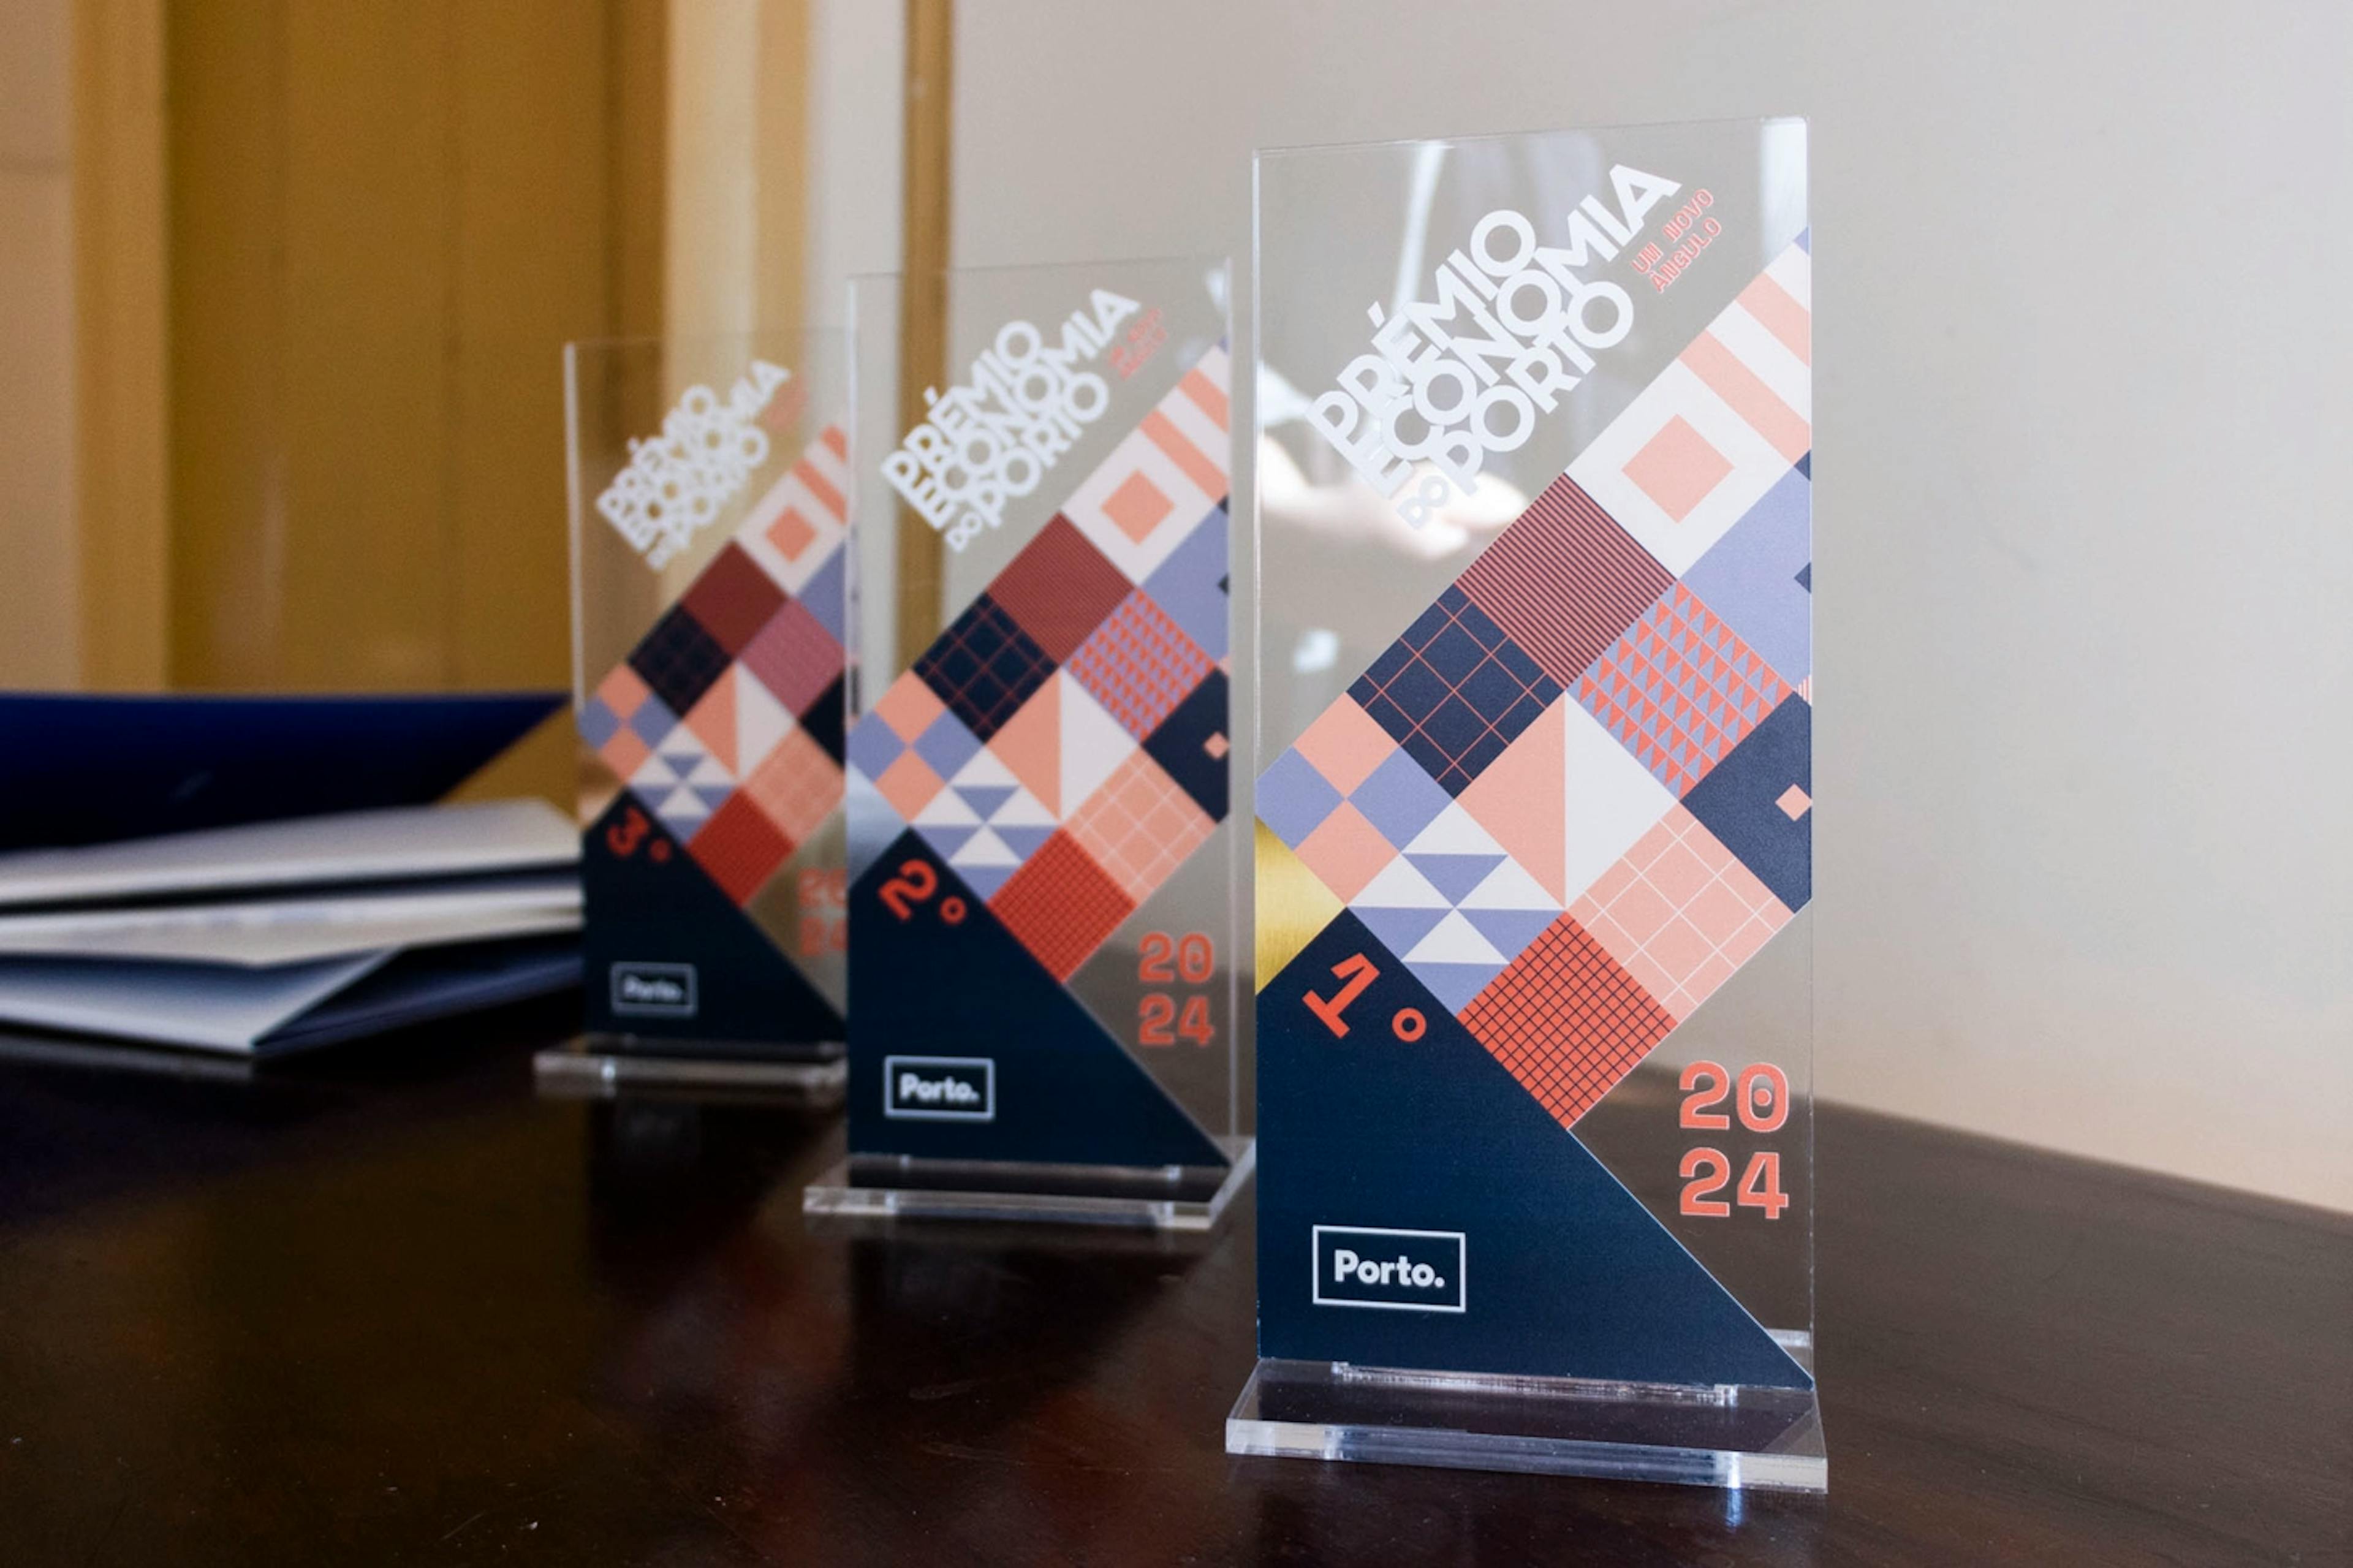 Trophies from the 3rd Edition of the Porto Economics Award